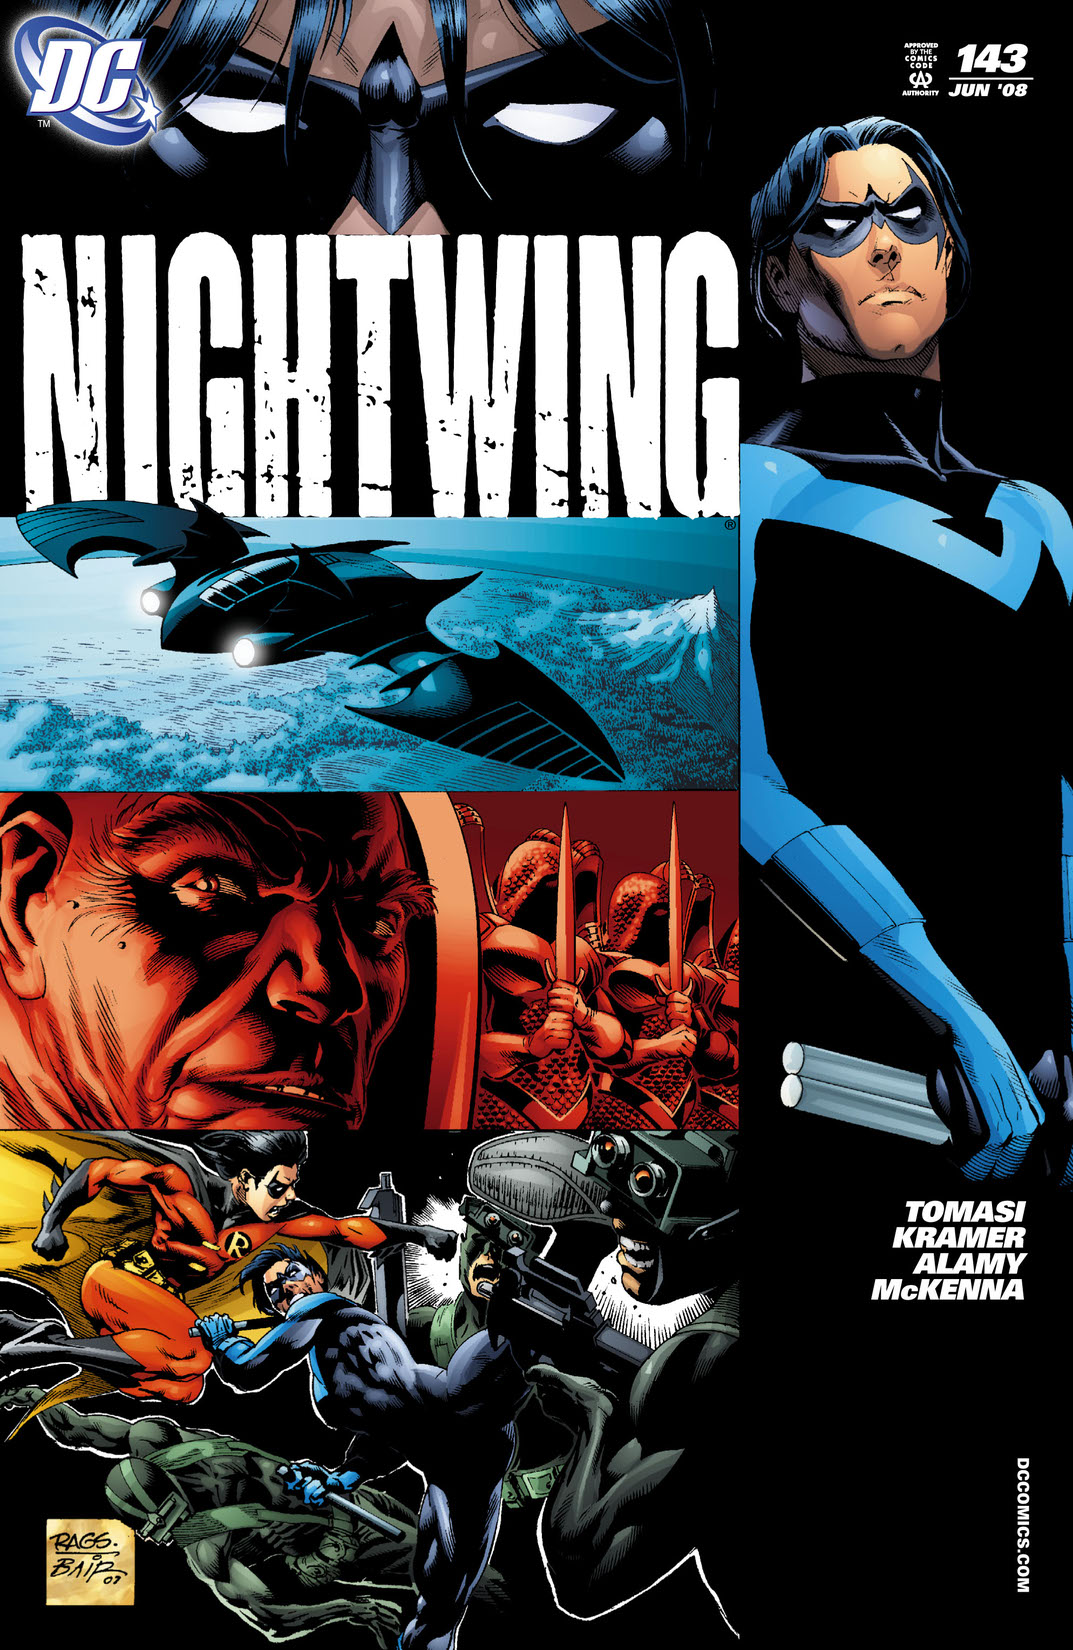 Nightwing (1996-) #143 preview images